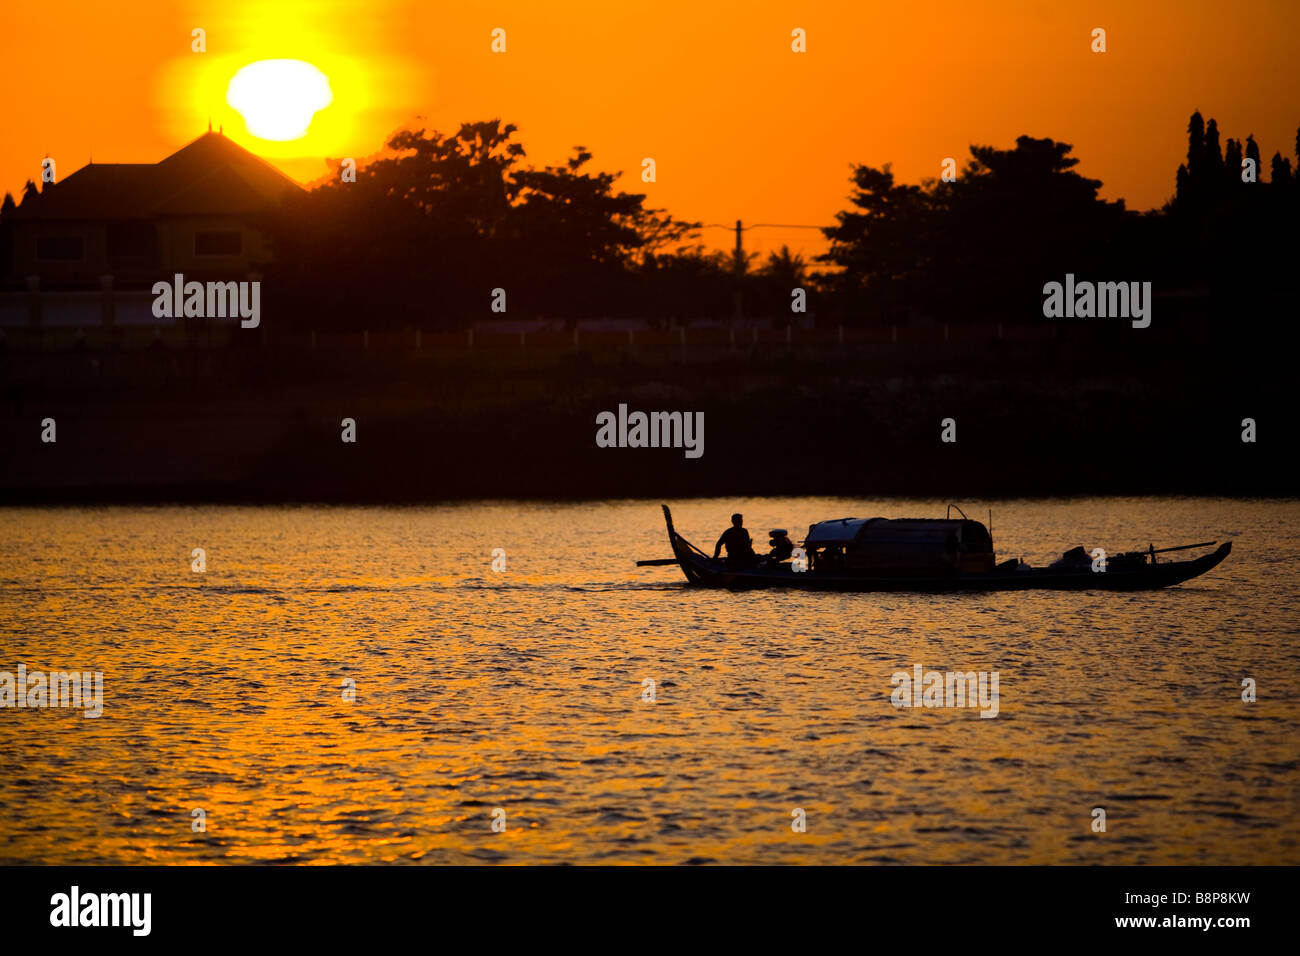 Photographed on the Mekong River Phnom Penh Cambodia Stock Photo